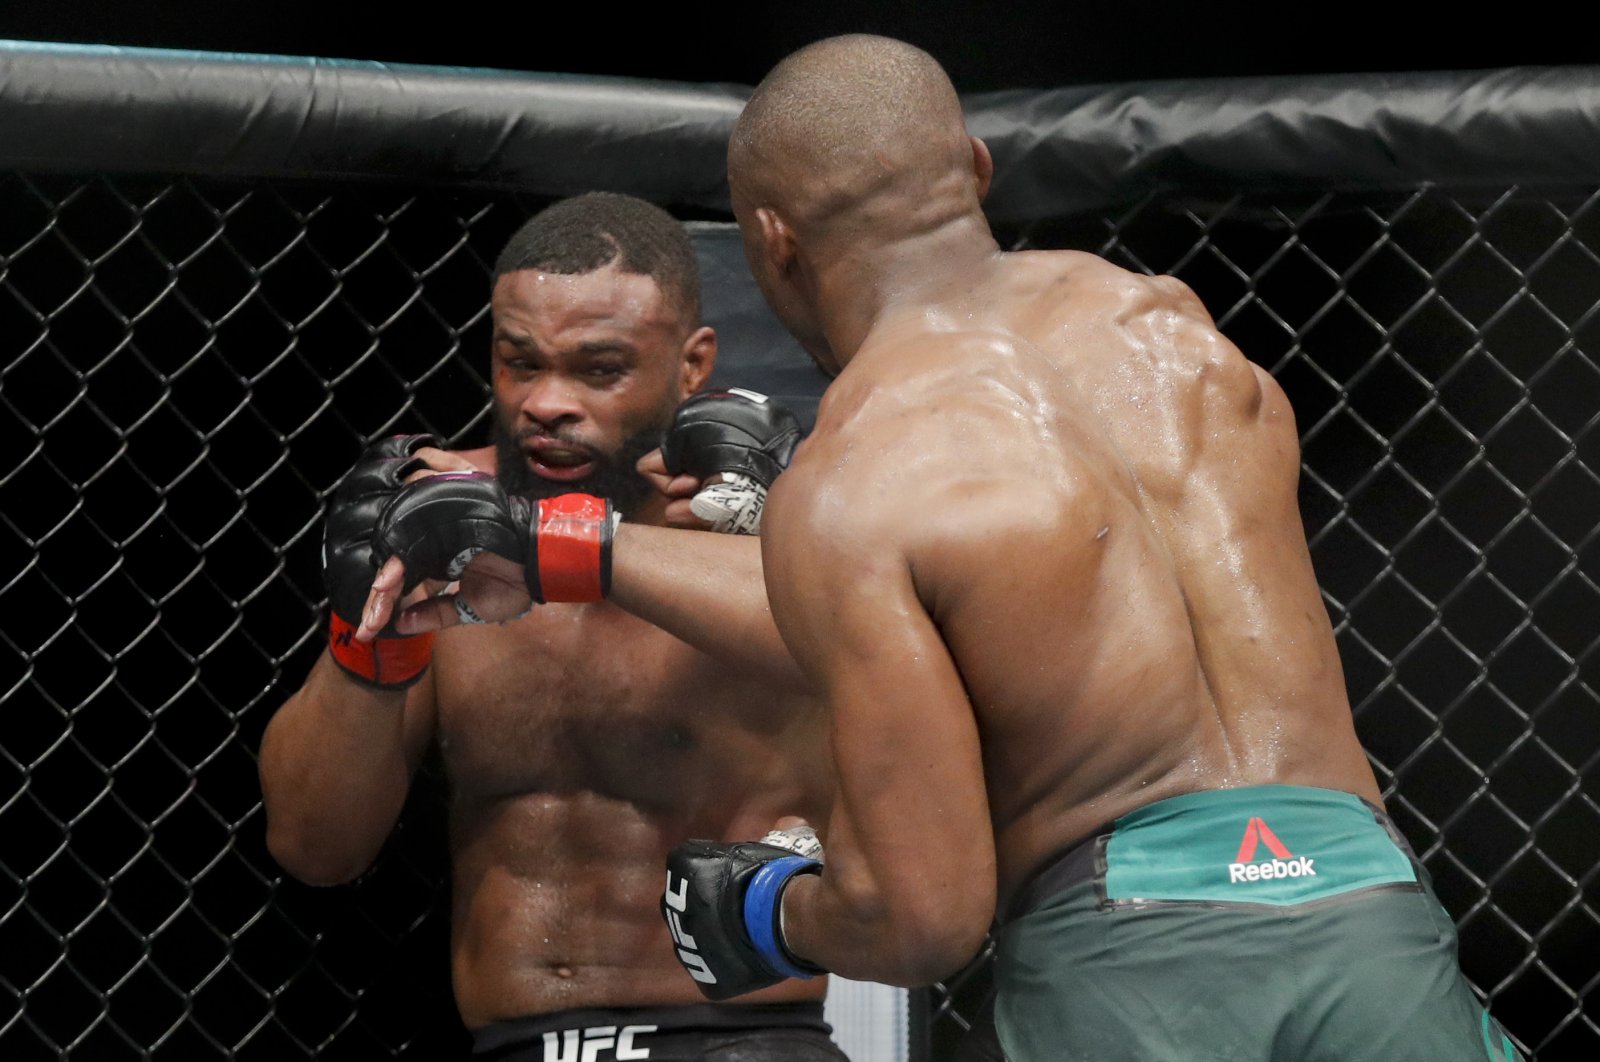 Kamaru Usman (R) hits Tyron Woodley in a welterweight mixed martial arts title fight at UFC 235, Las Vegas, U.S., March 2, 2019. (AP Photo)